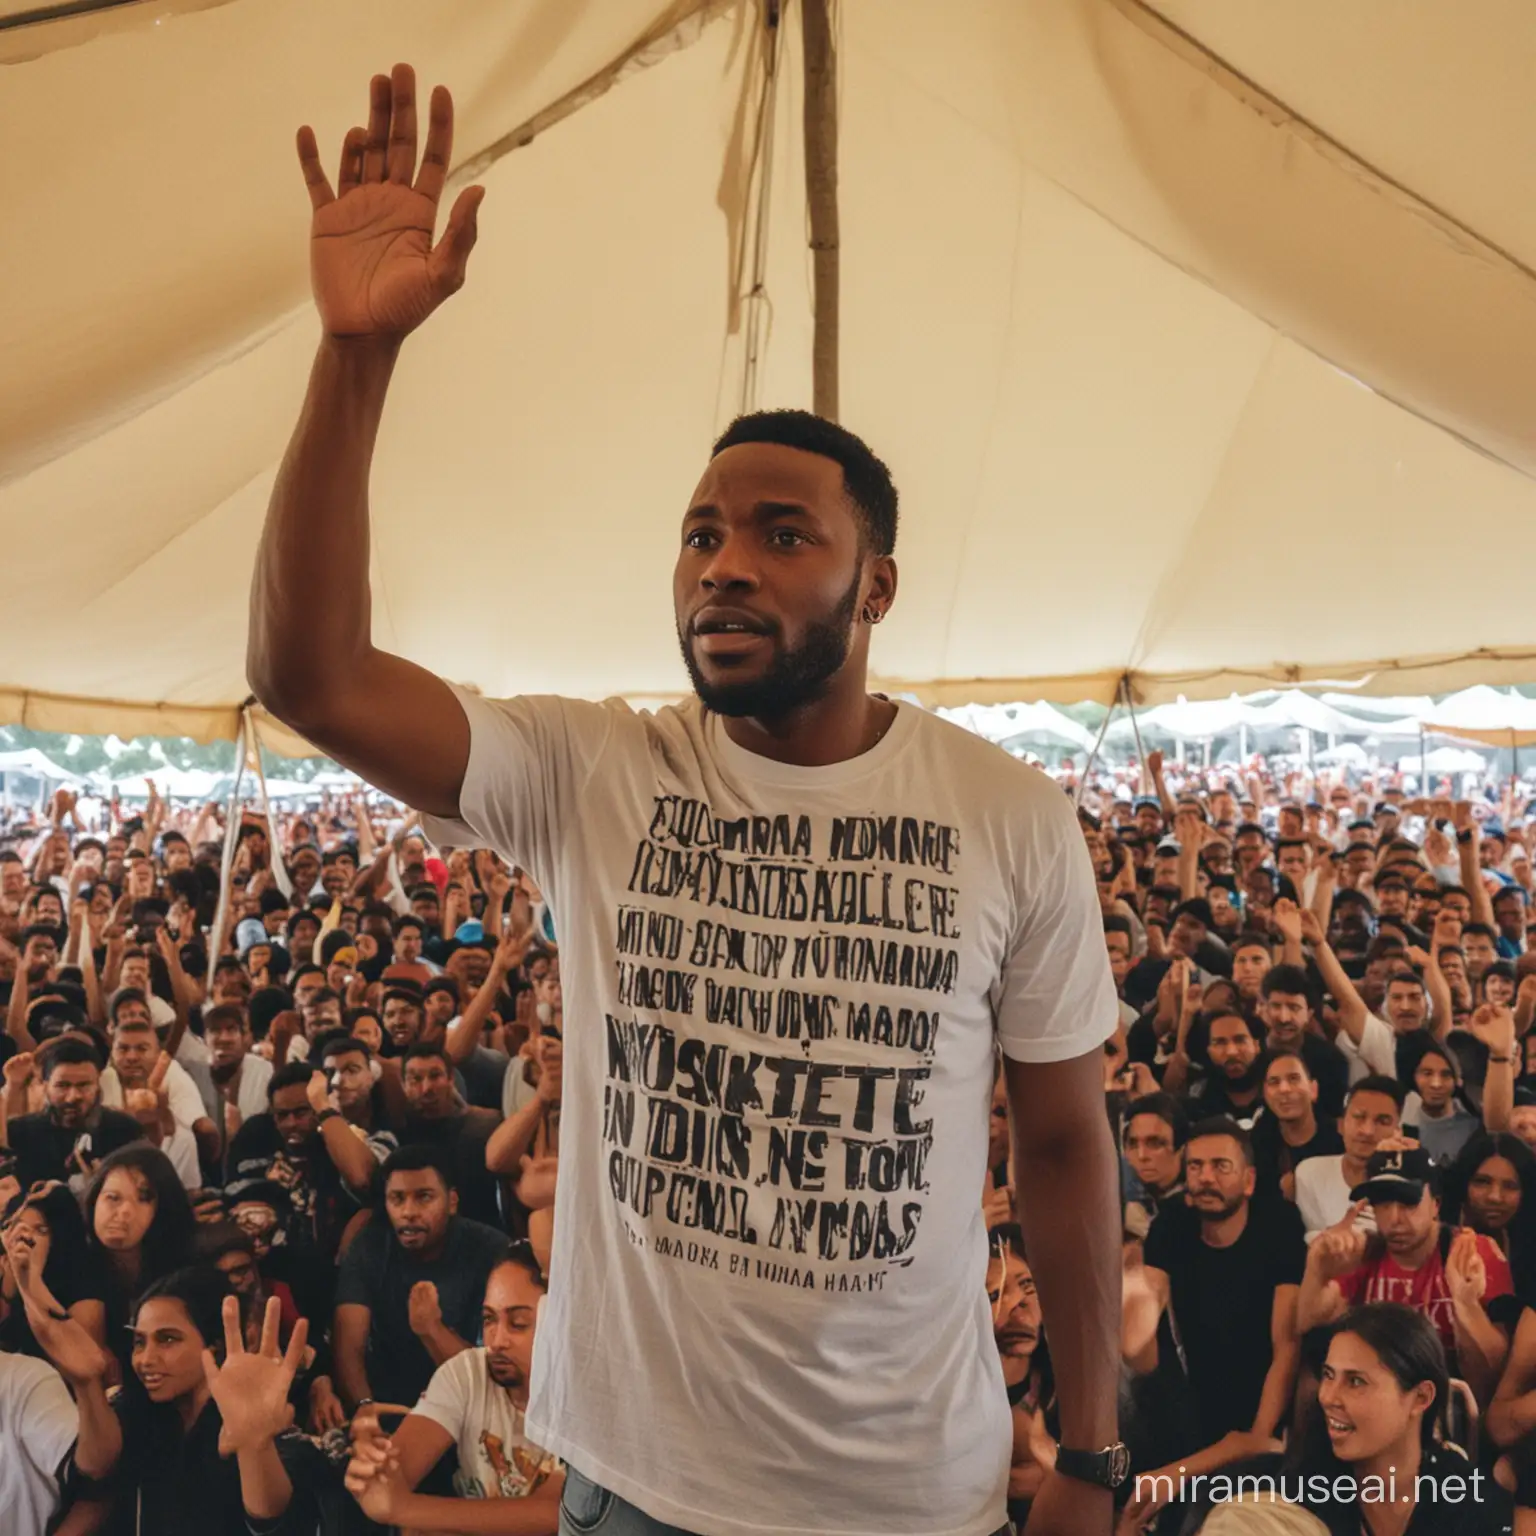 African American Man in TUMANA NIKULETEE TShirt Interacting in a Crowded Tent